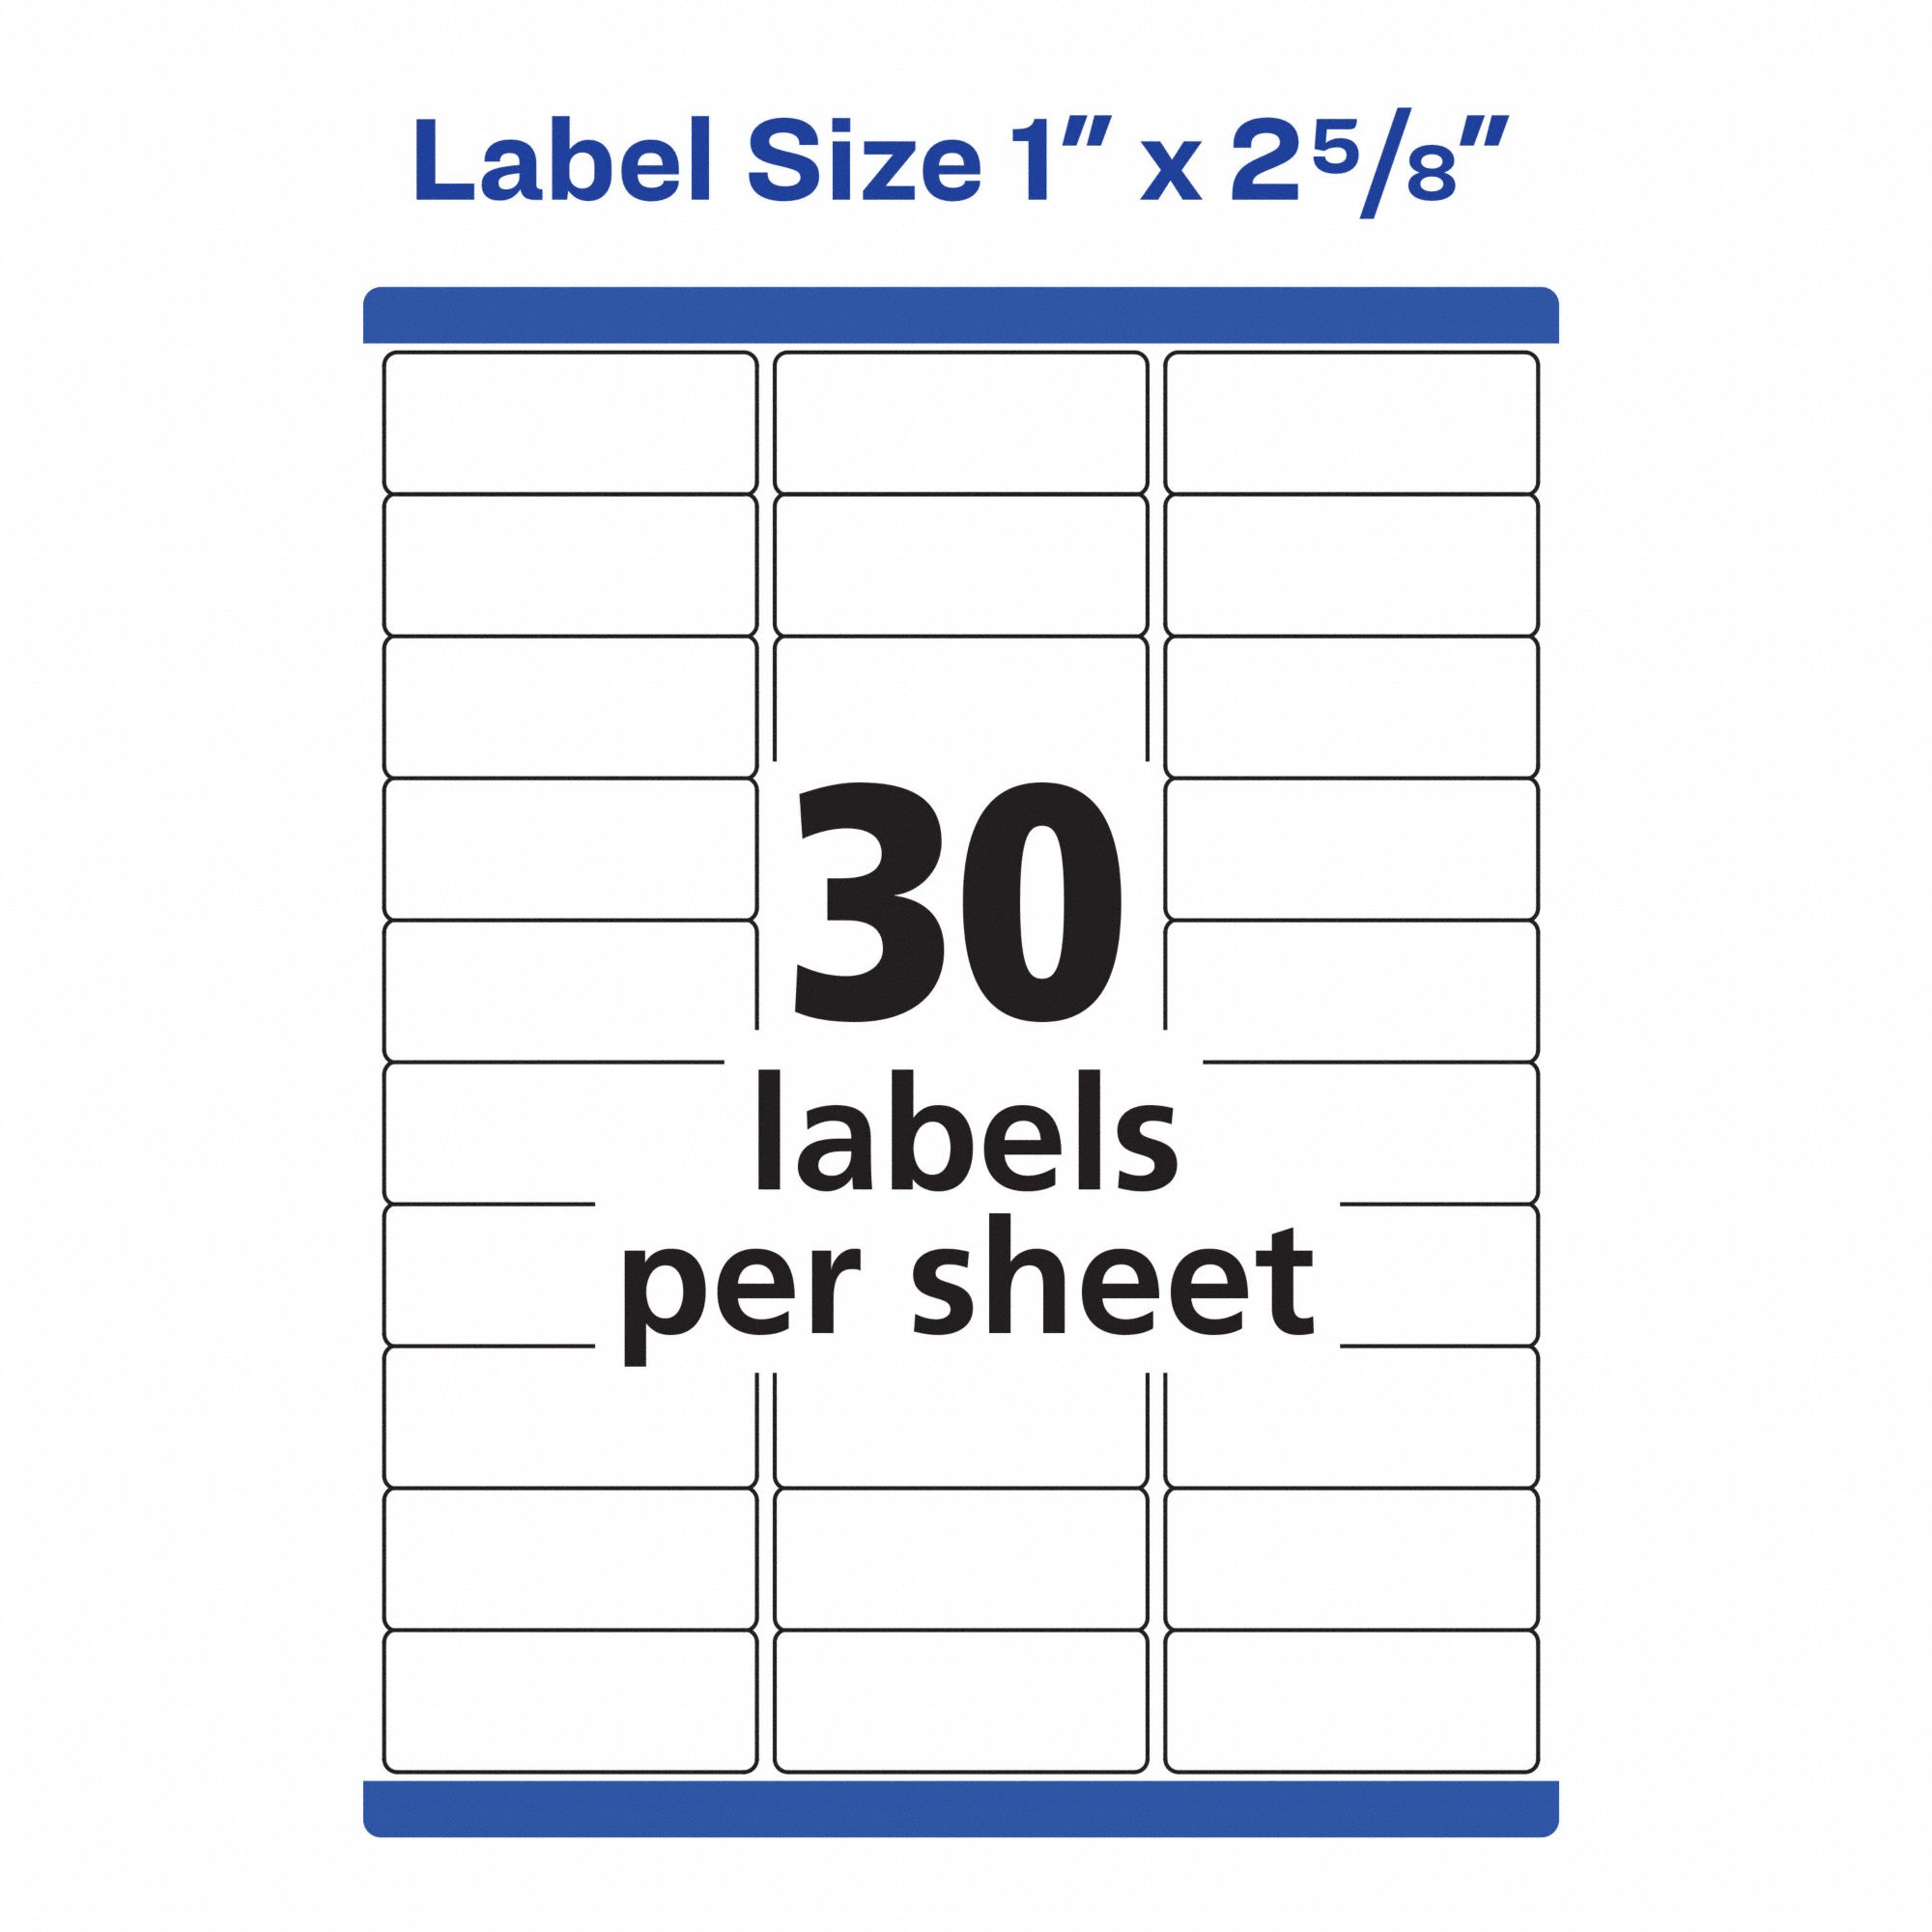 AVERY Laser Label 5 520 Avery Template White 1 In Label Ht 2 5 8 In Label Wd 1 500 PK